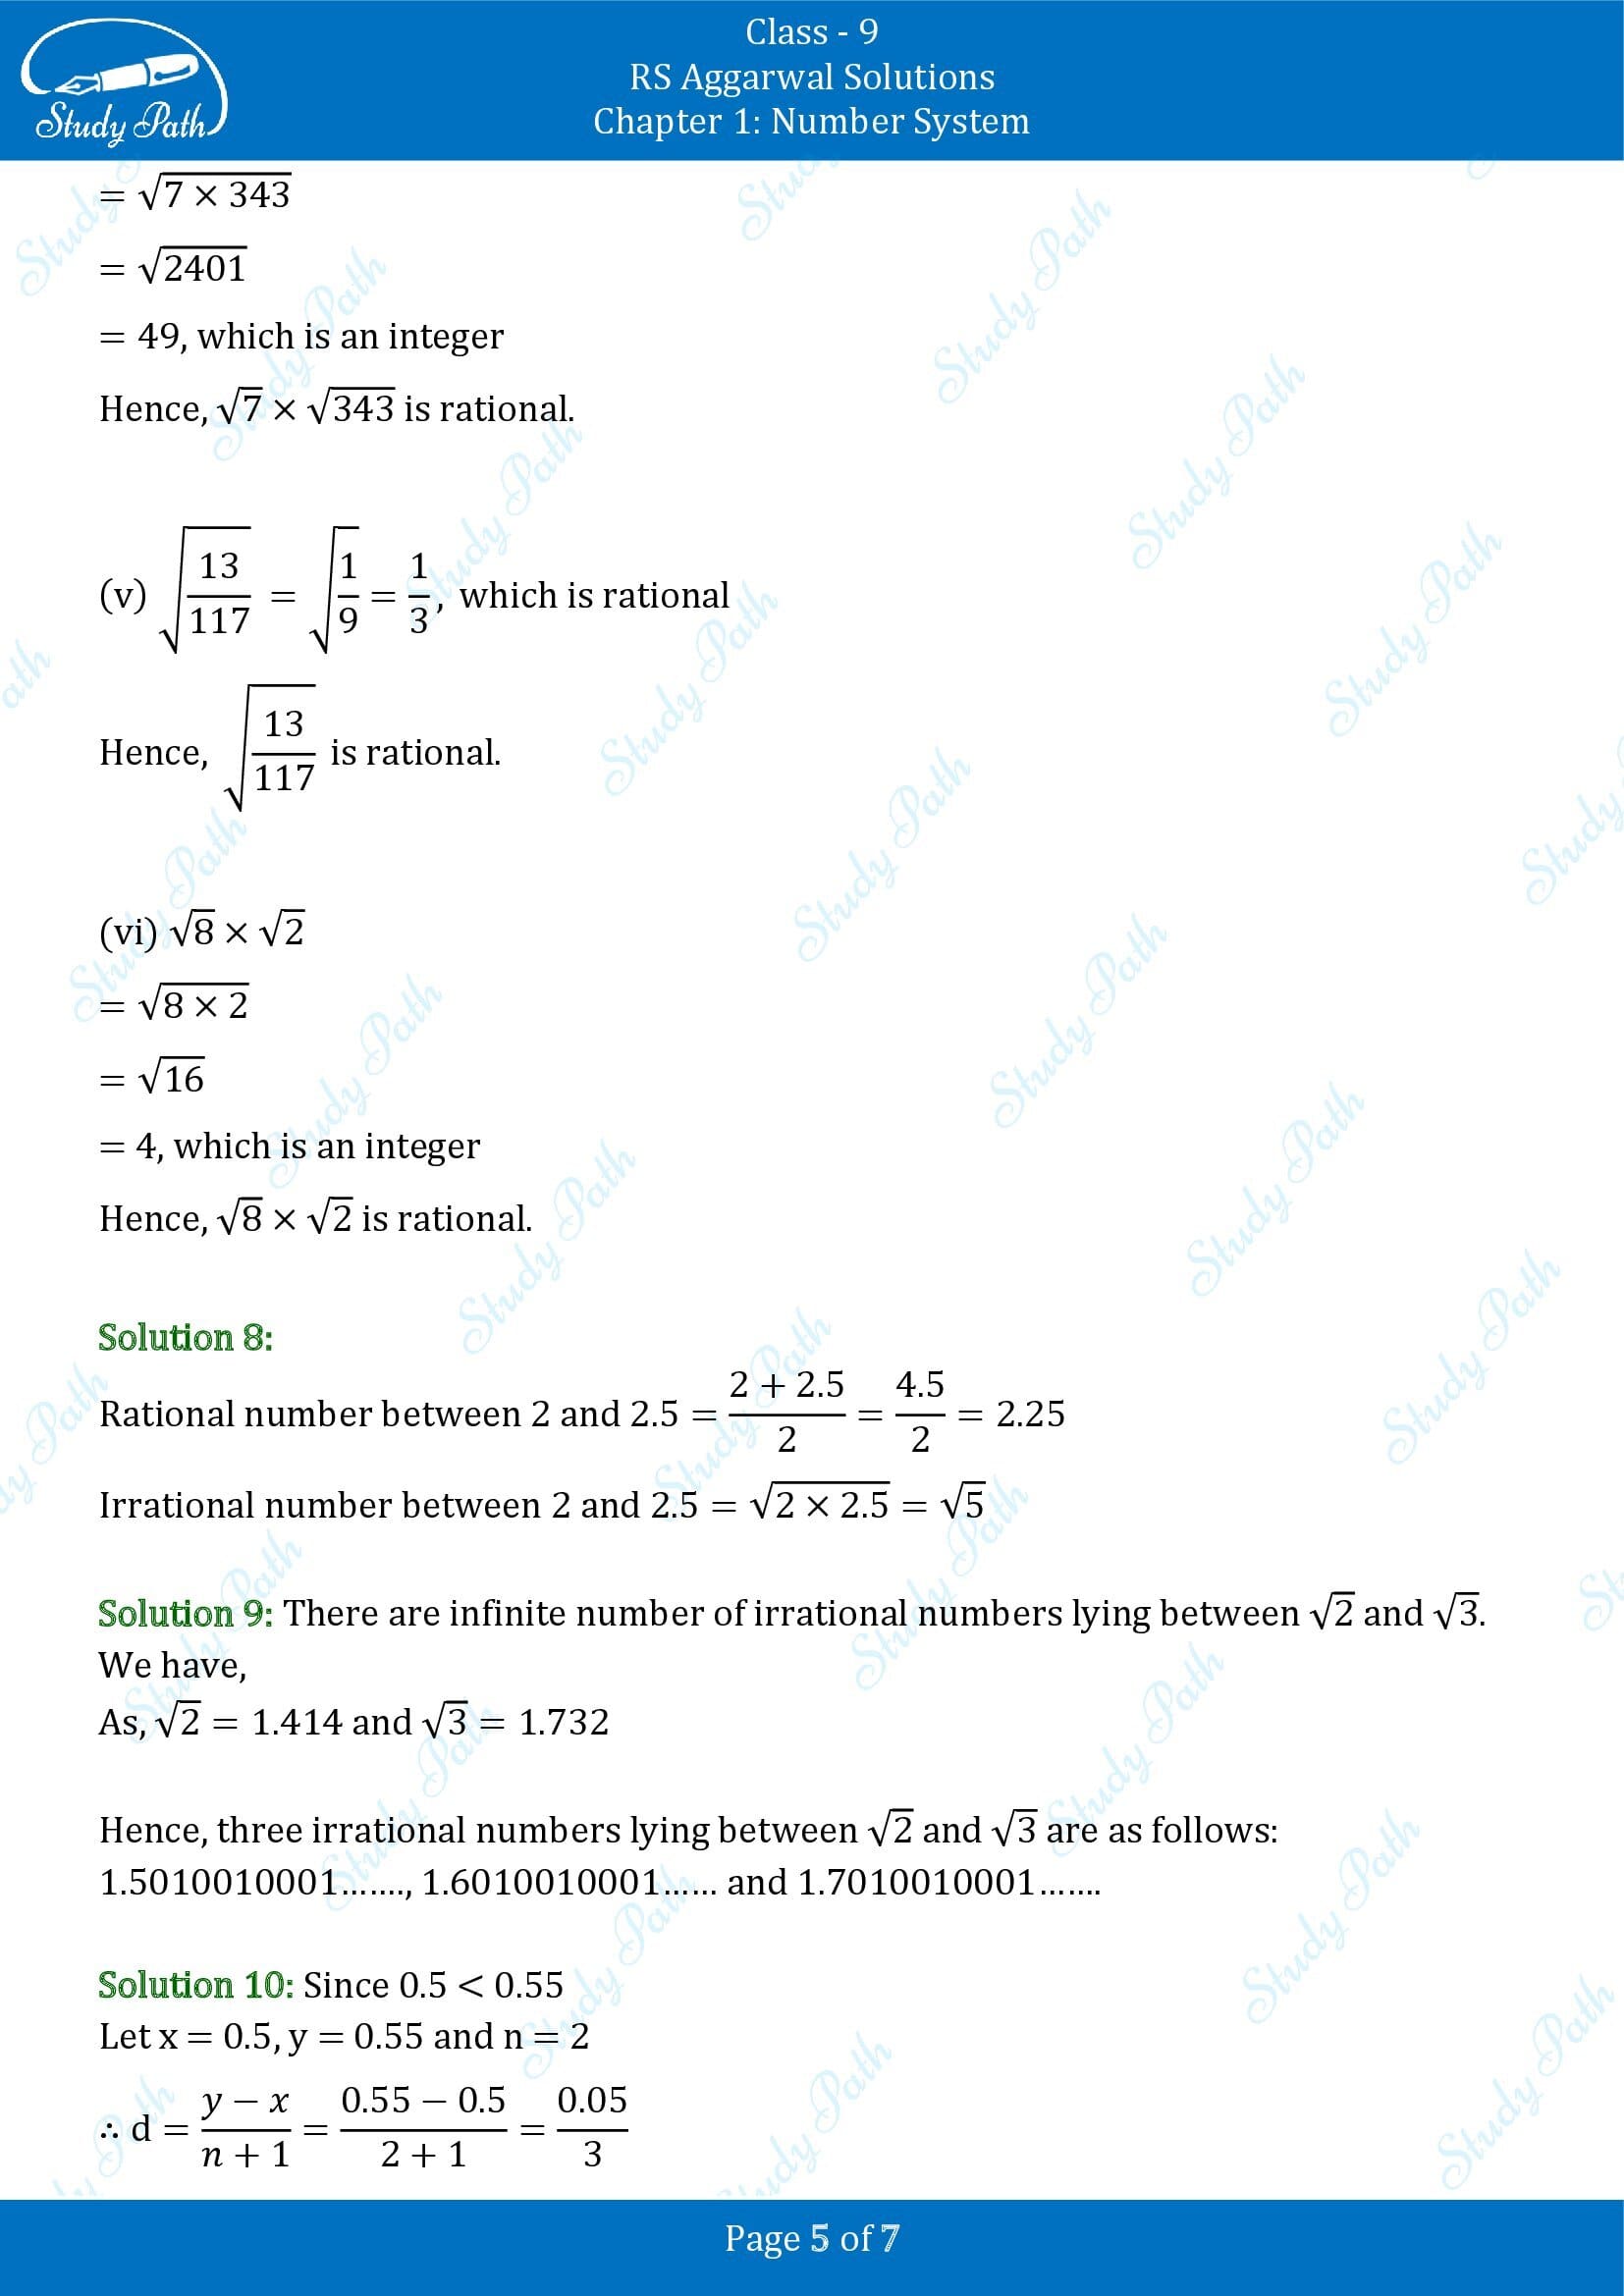 RS Aggarwal Solutions Class 9 Chapter 1 Number System Exercise 1C 00005